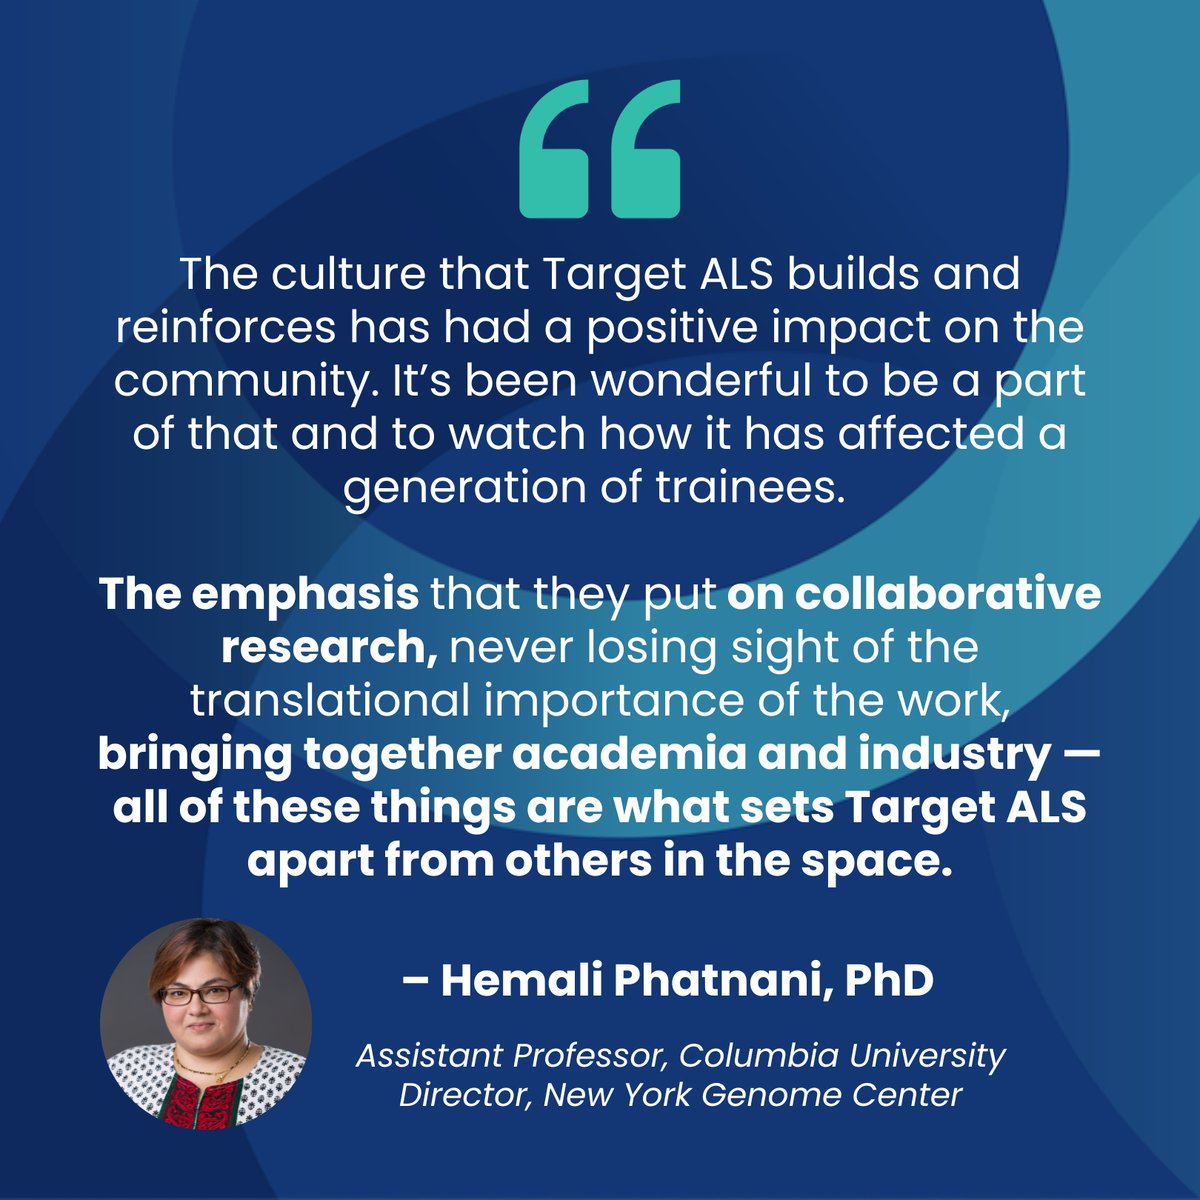 Dr. Hemali Phatnani, PhD is working to answer elusive questions that can transform our understanding of ALS-FTD. 🧠 Her work (funded by TALS) will decode which specific genes are changing in healthy or sick neurons and neighboring cells within #ALS and #FTD cases.